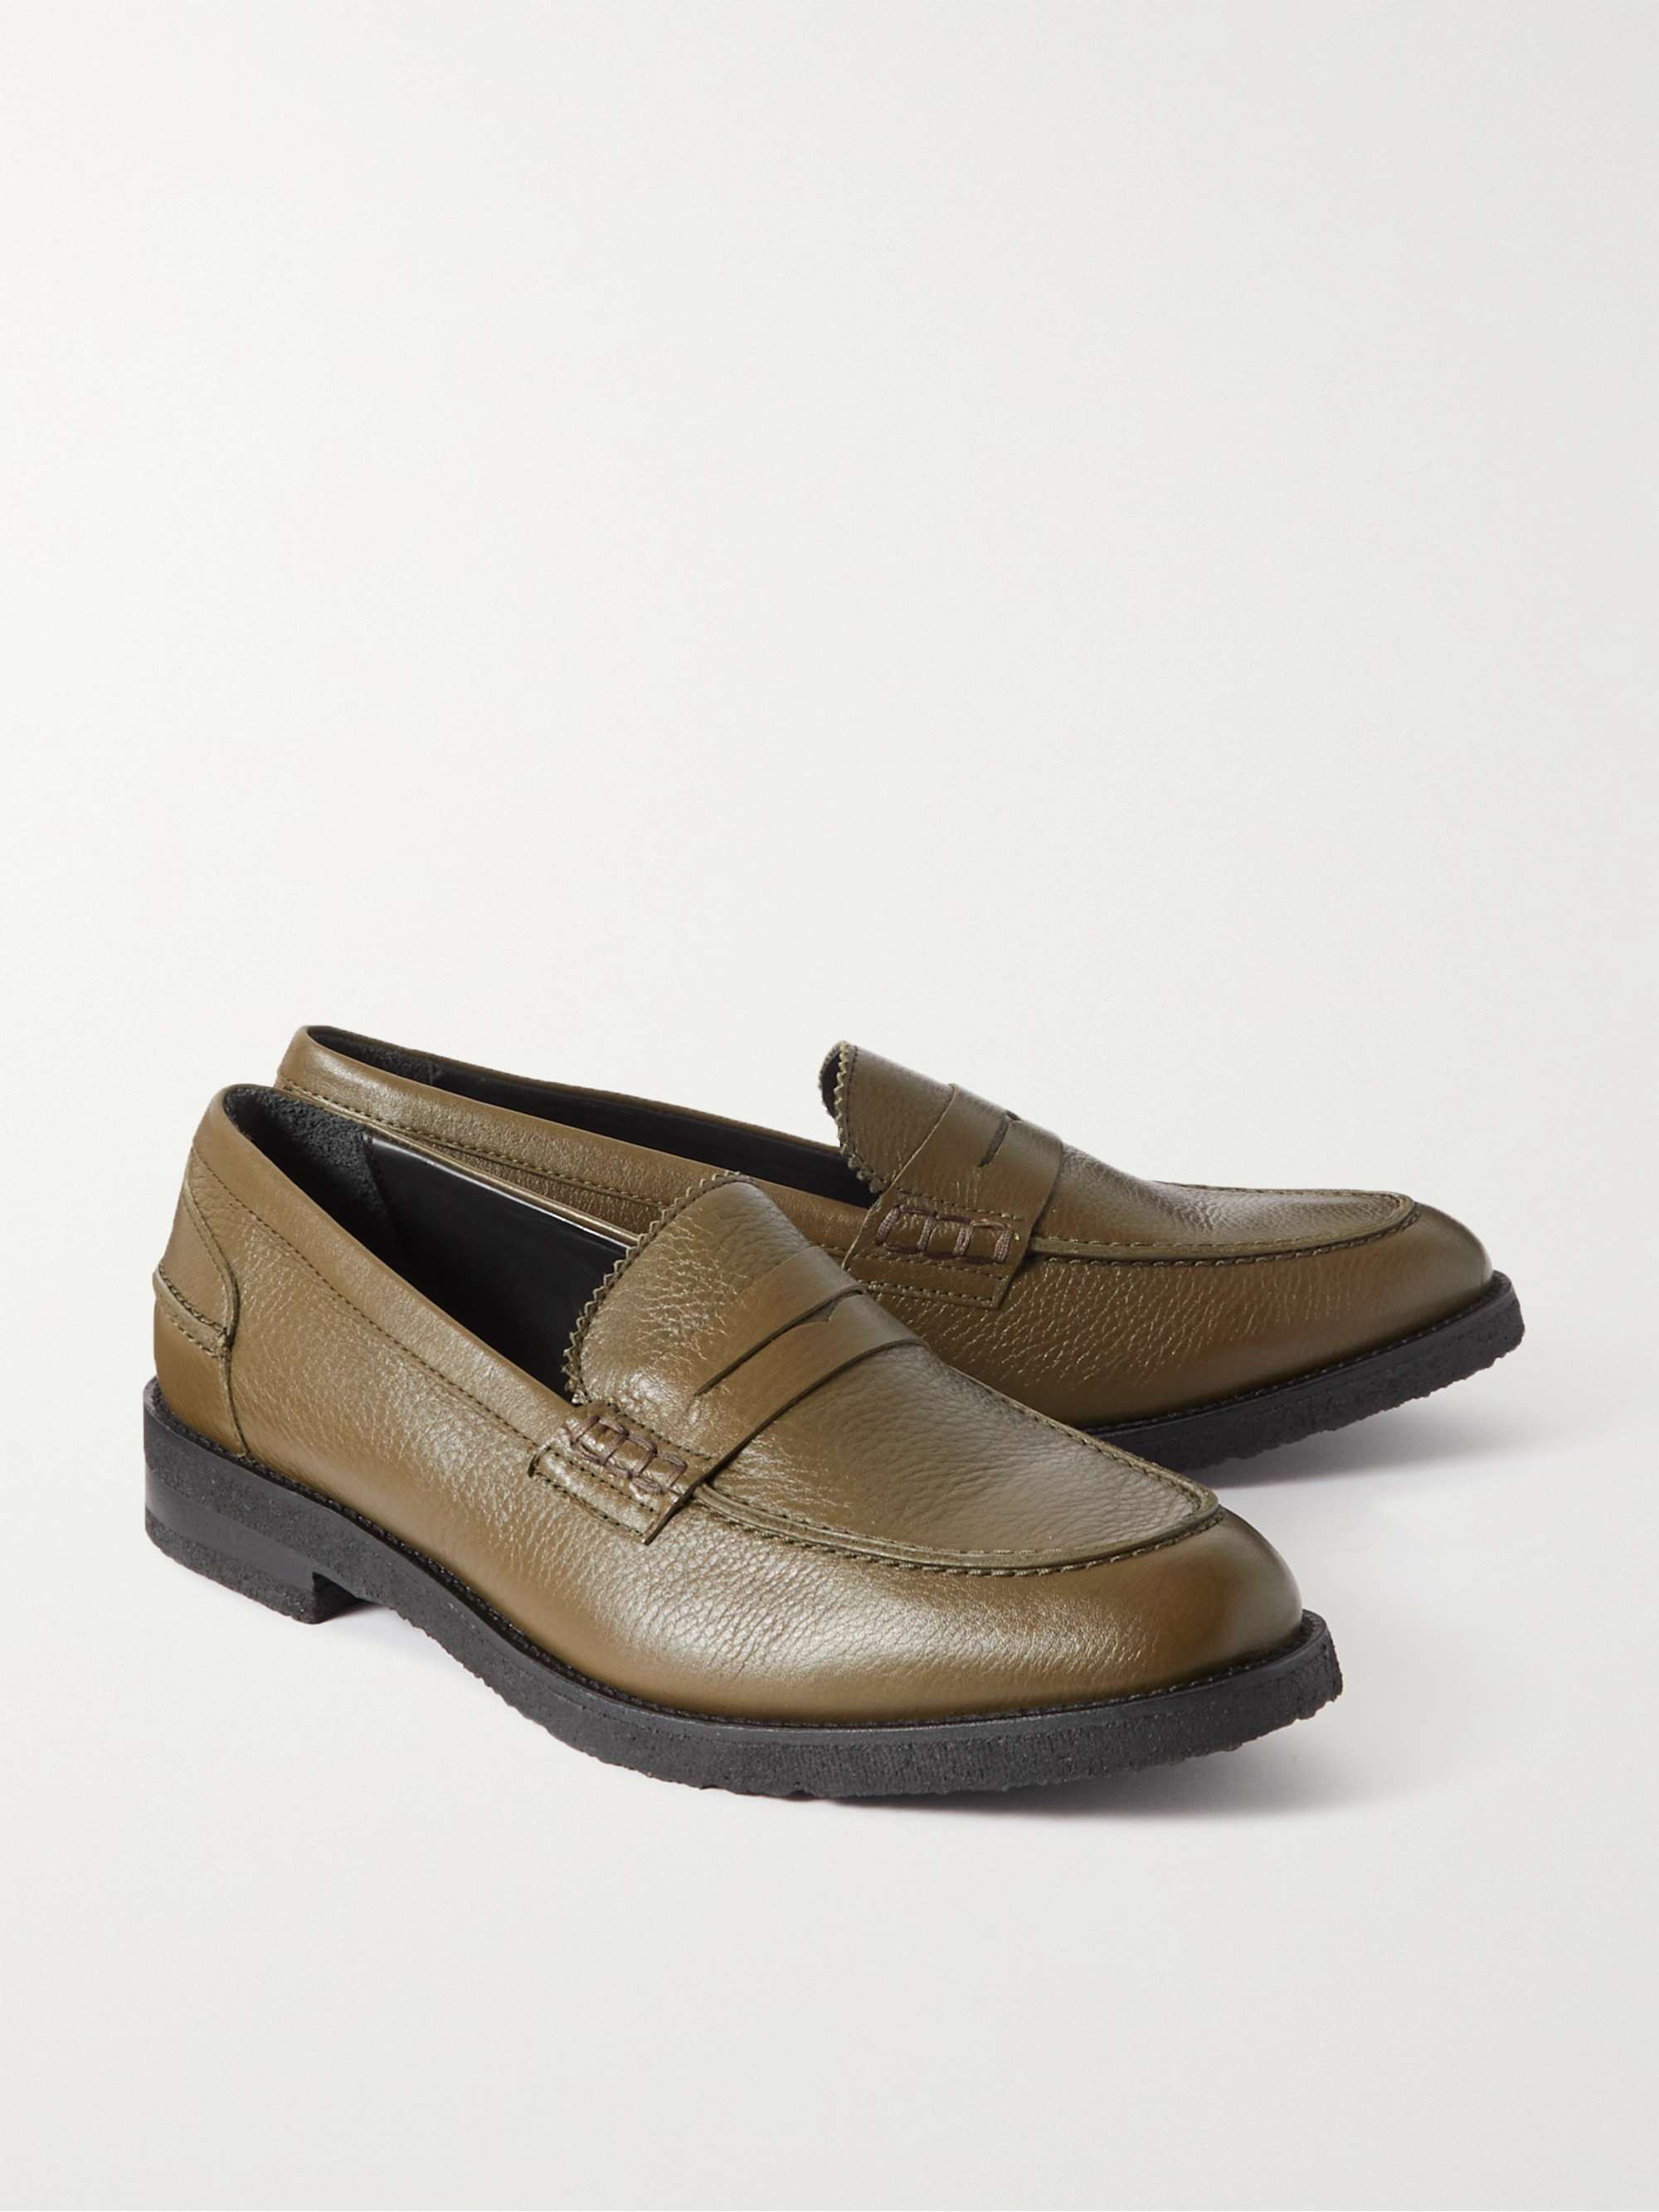 VINNY'S Paname Calf Hair Penny Loafers